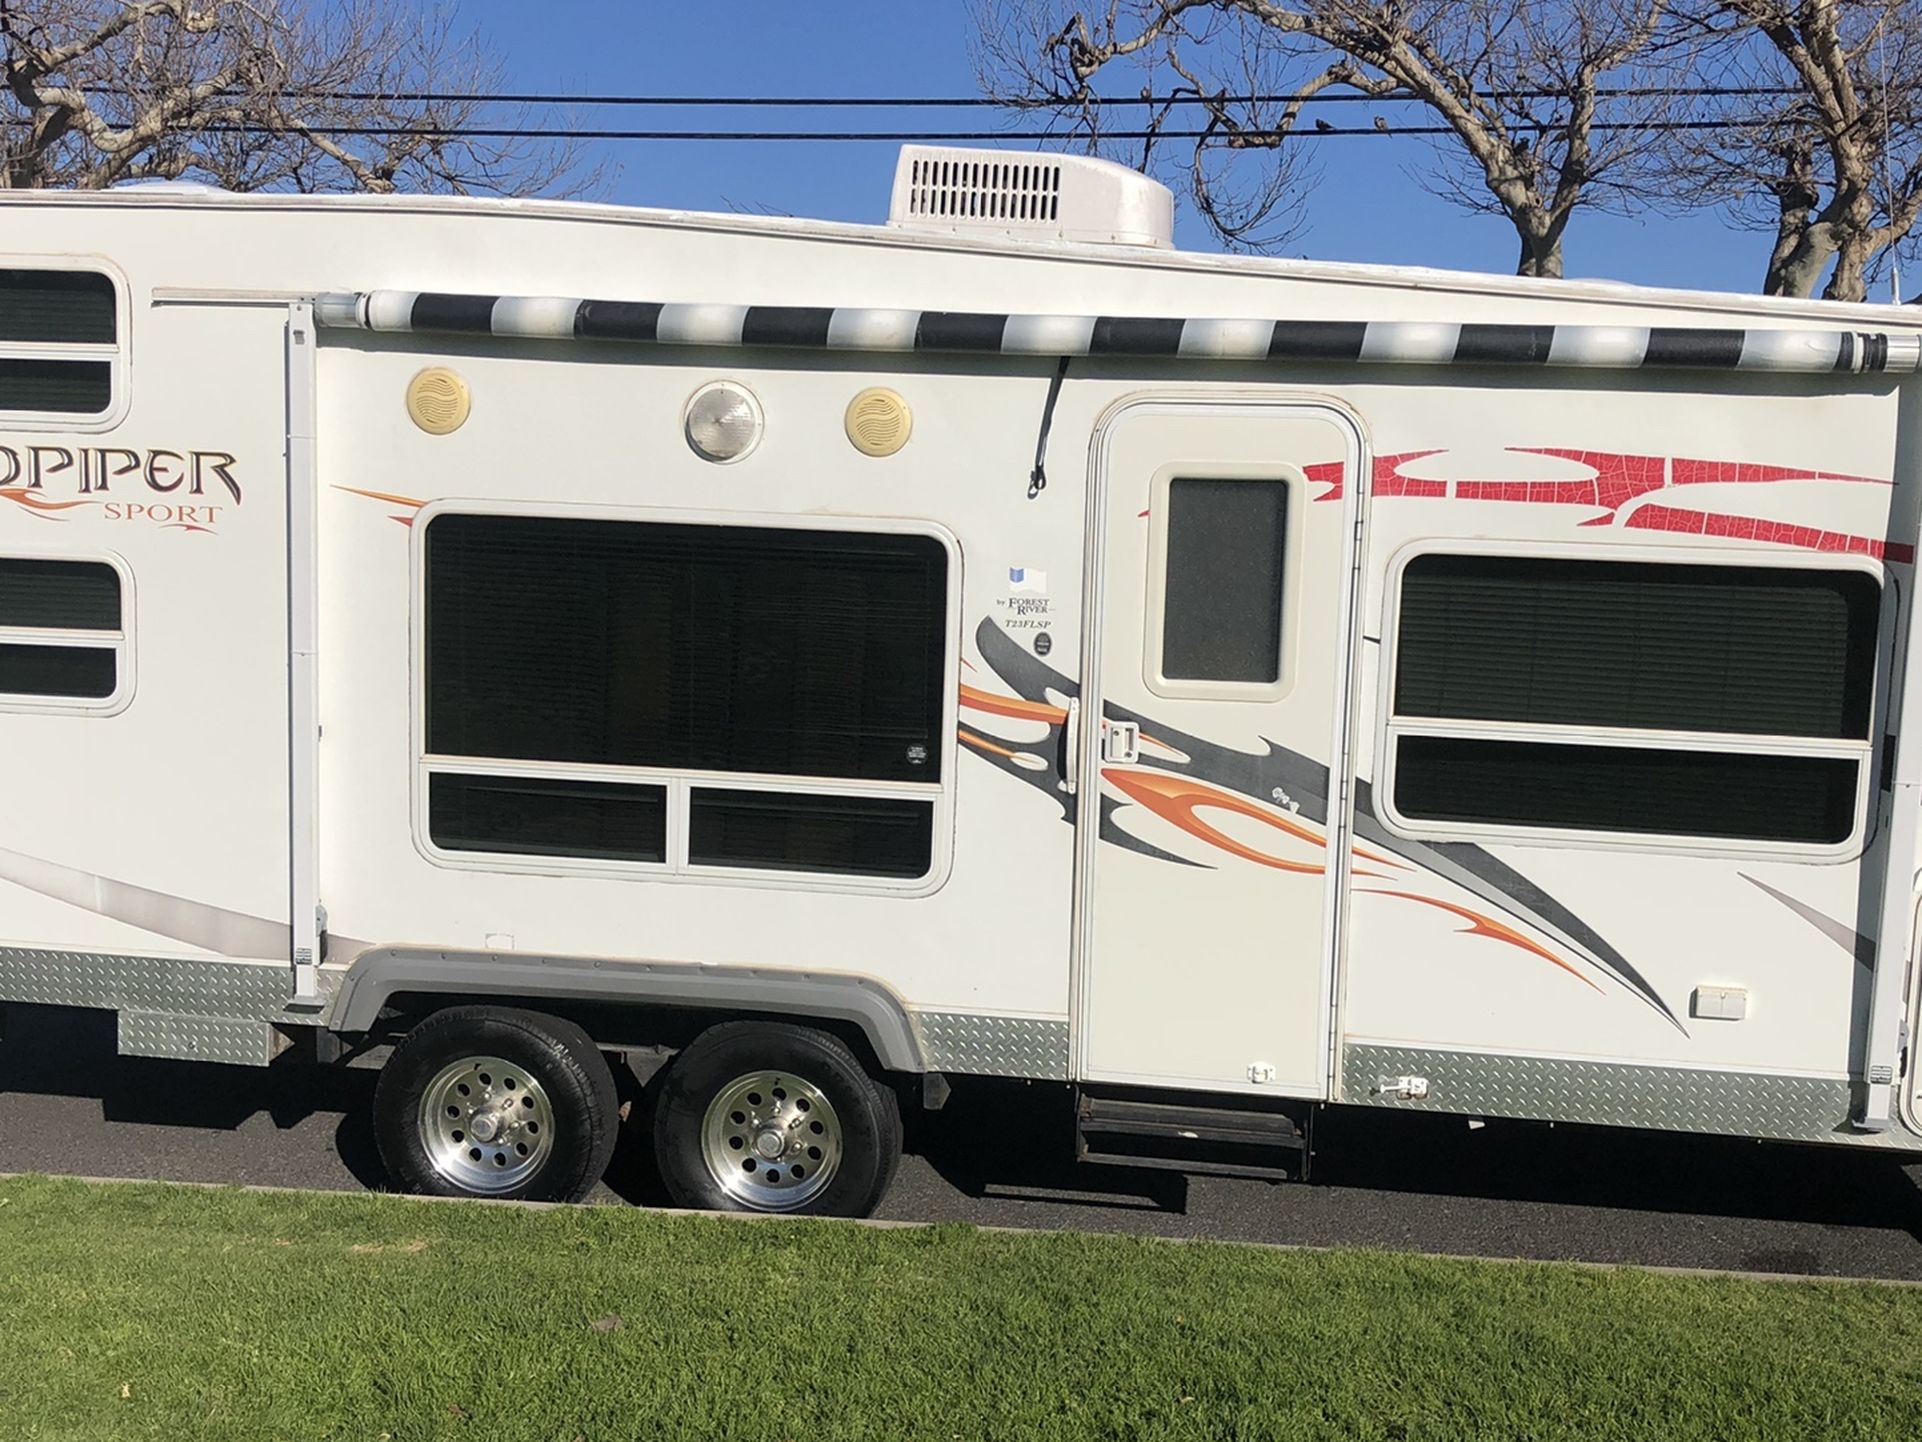 2008 Sandpiper Toy Hauler w/generator and Fuel Station 23 Ft